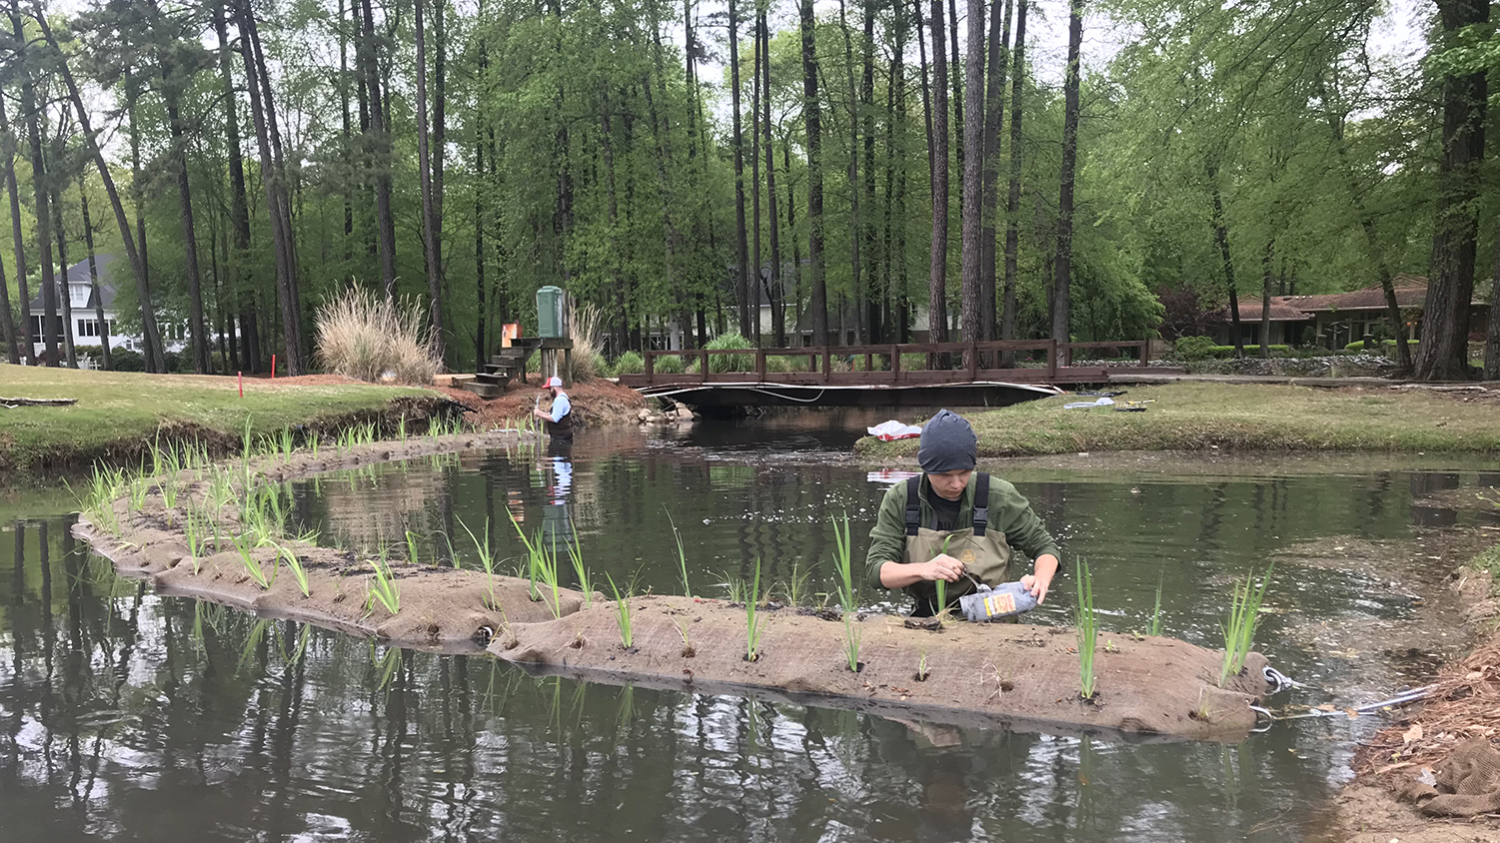 Two students working in a water body (lake or pond), where they are building floating wetlands.